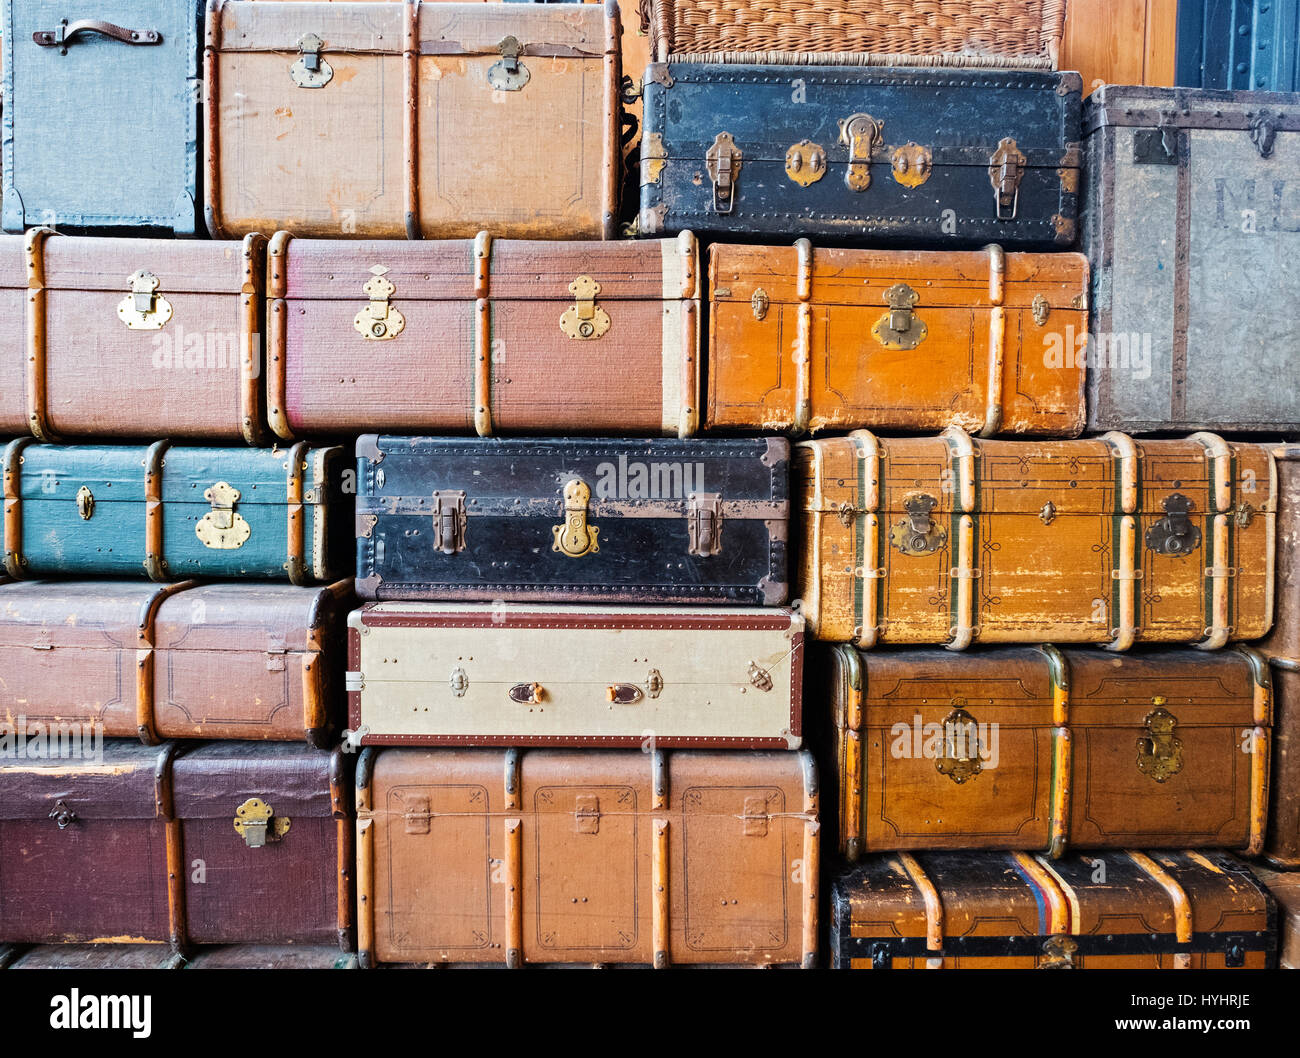 Many old suitcases stacked up Stock Photo